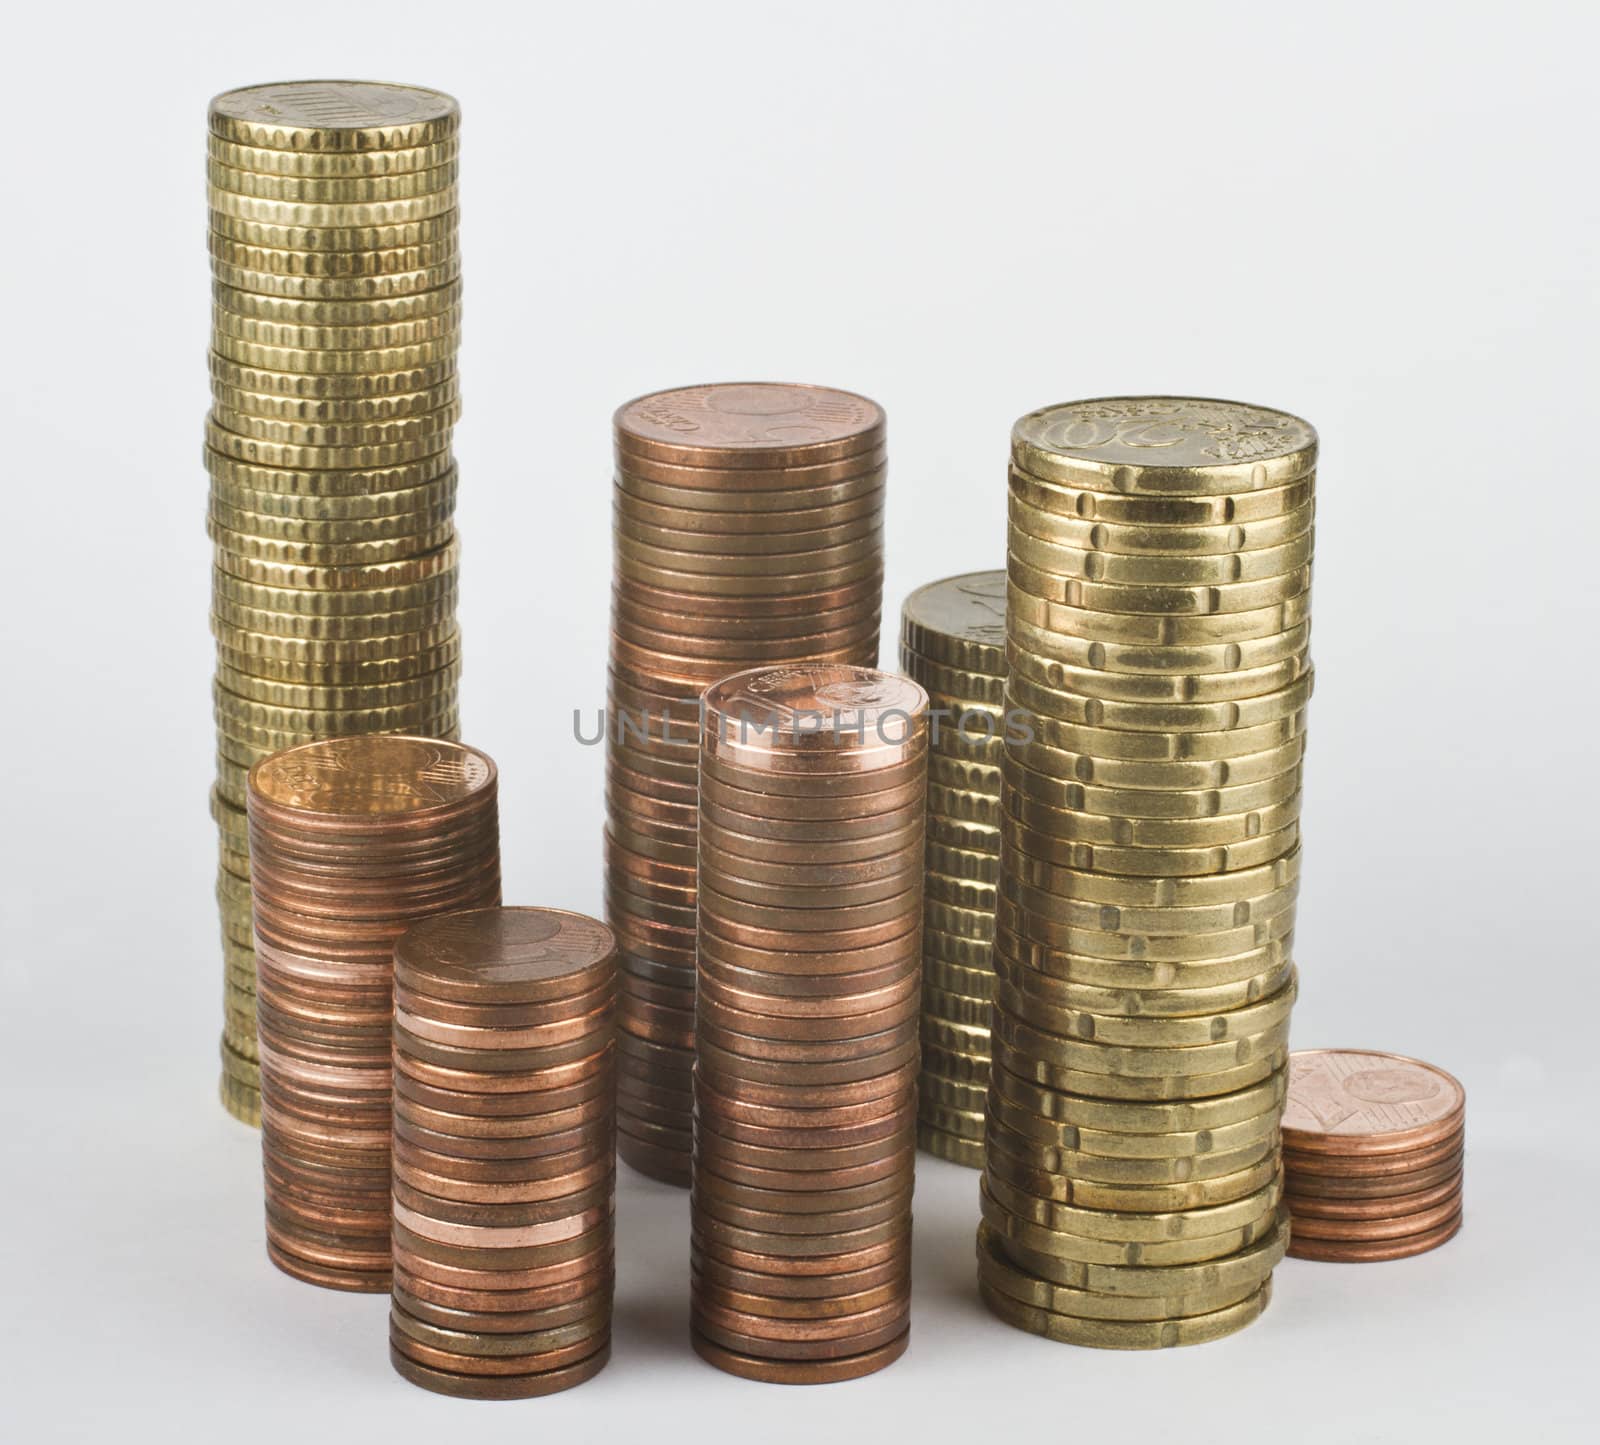 stacks of euro coins in grey background